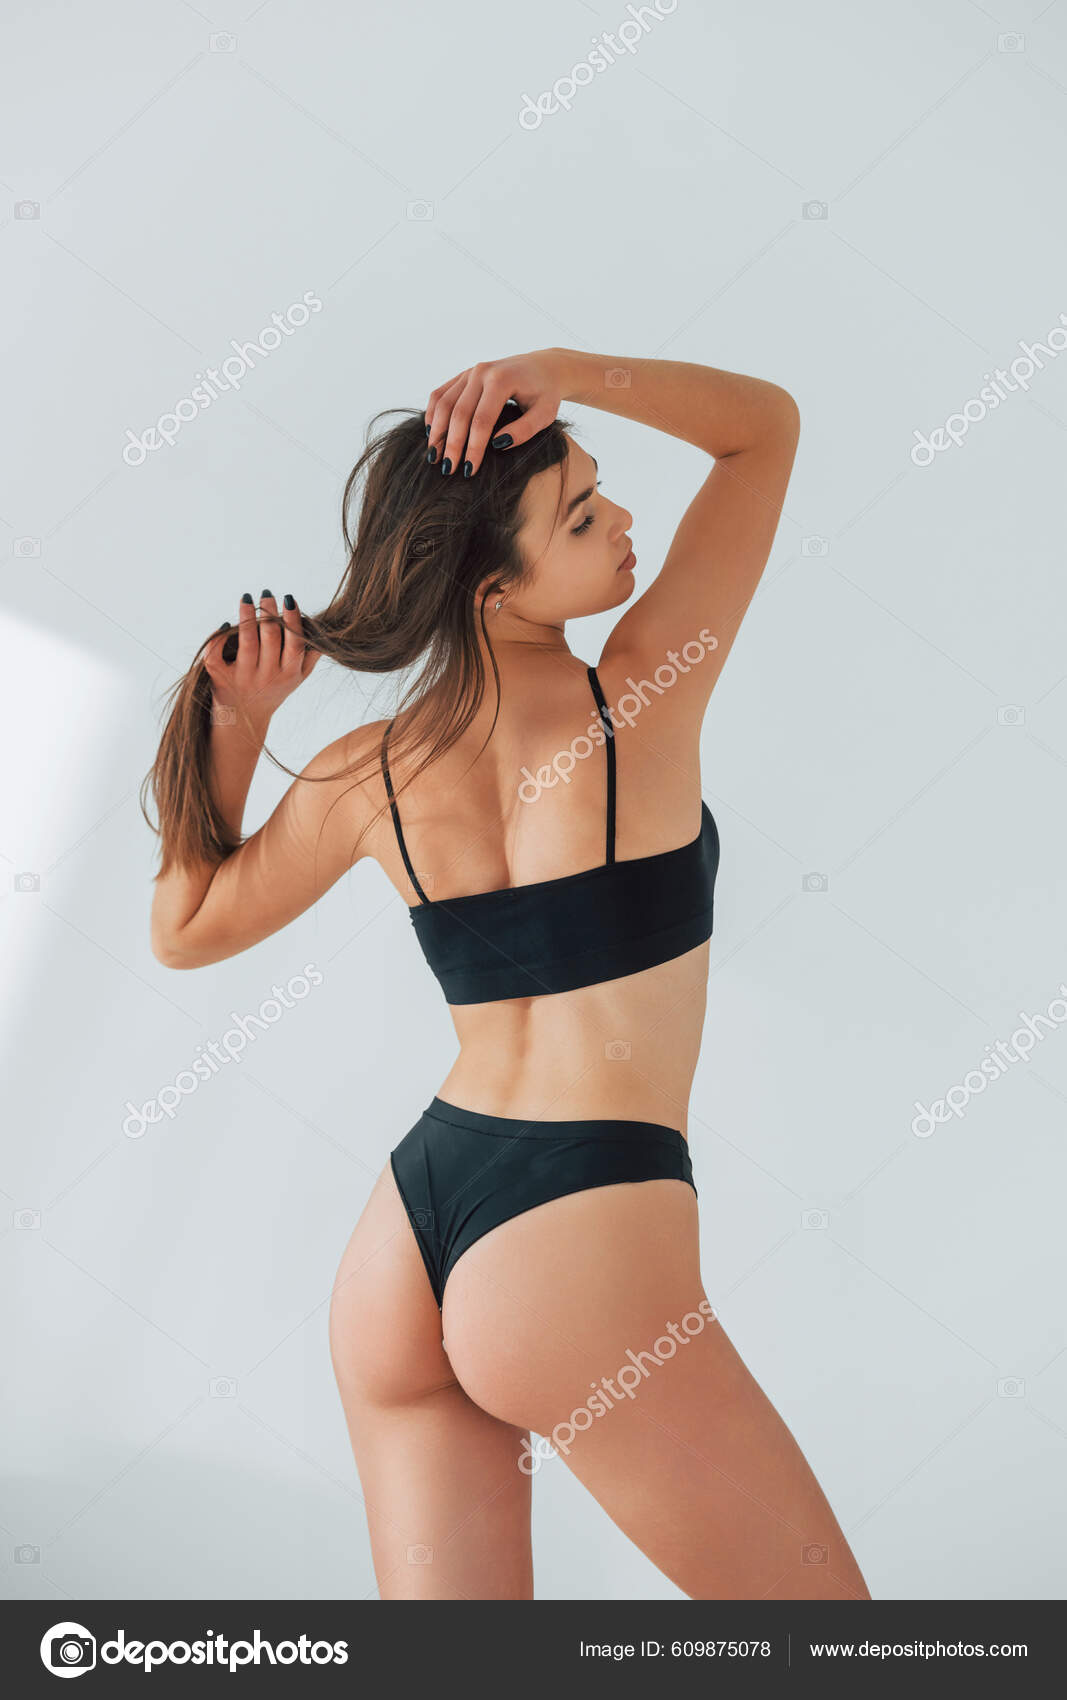 Showing Body Beautiful Woman Underwear Posing Indoors Stock Photo by  ©myronstandret 609875078